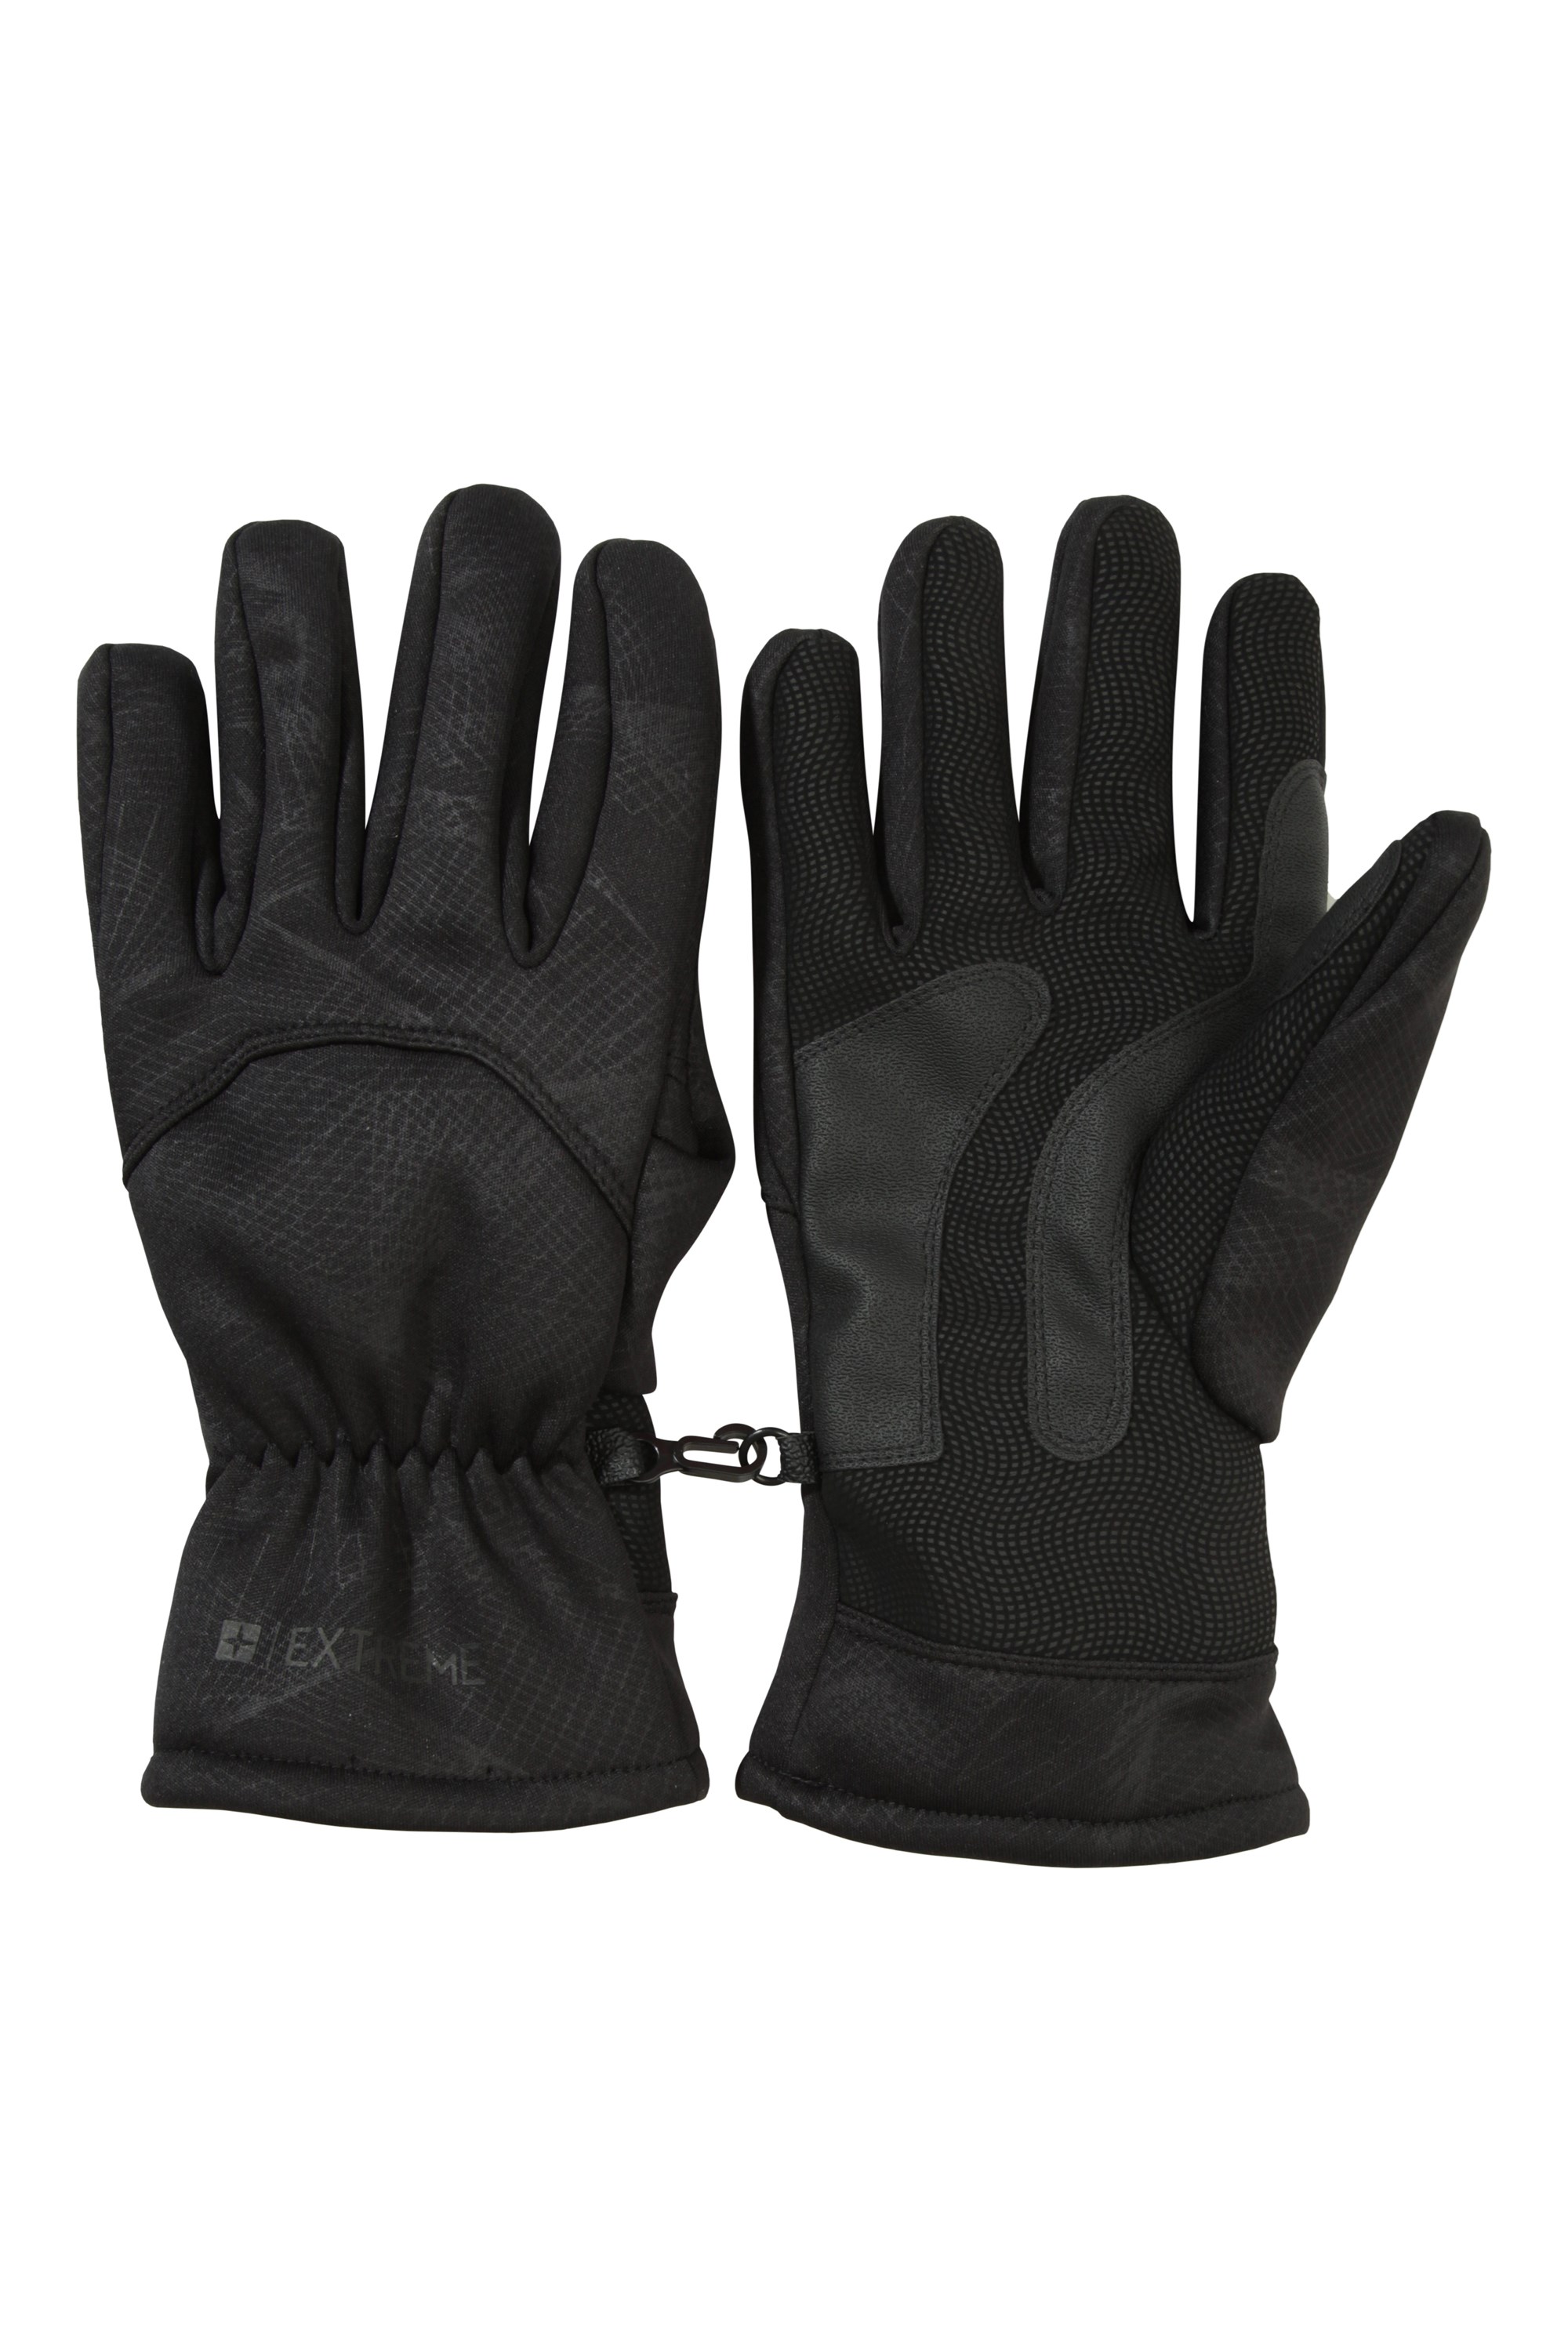 Mountain Warehouse Mens Windproof Extreme Gloves with Water-Resistant 